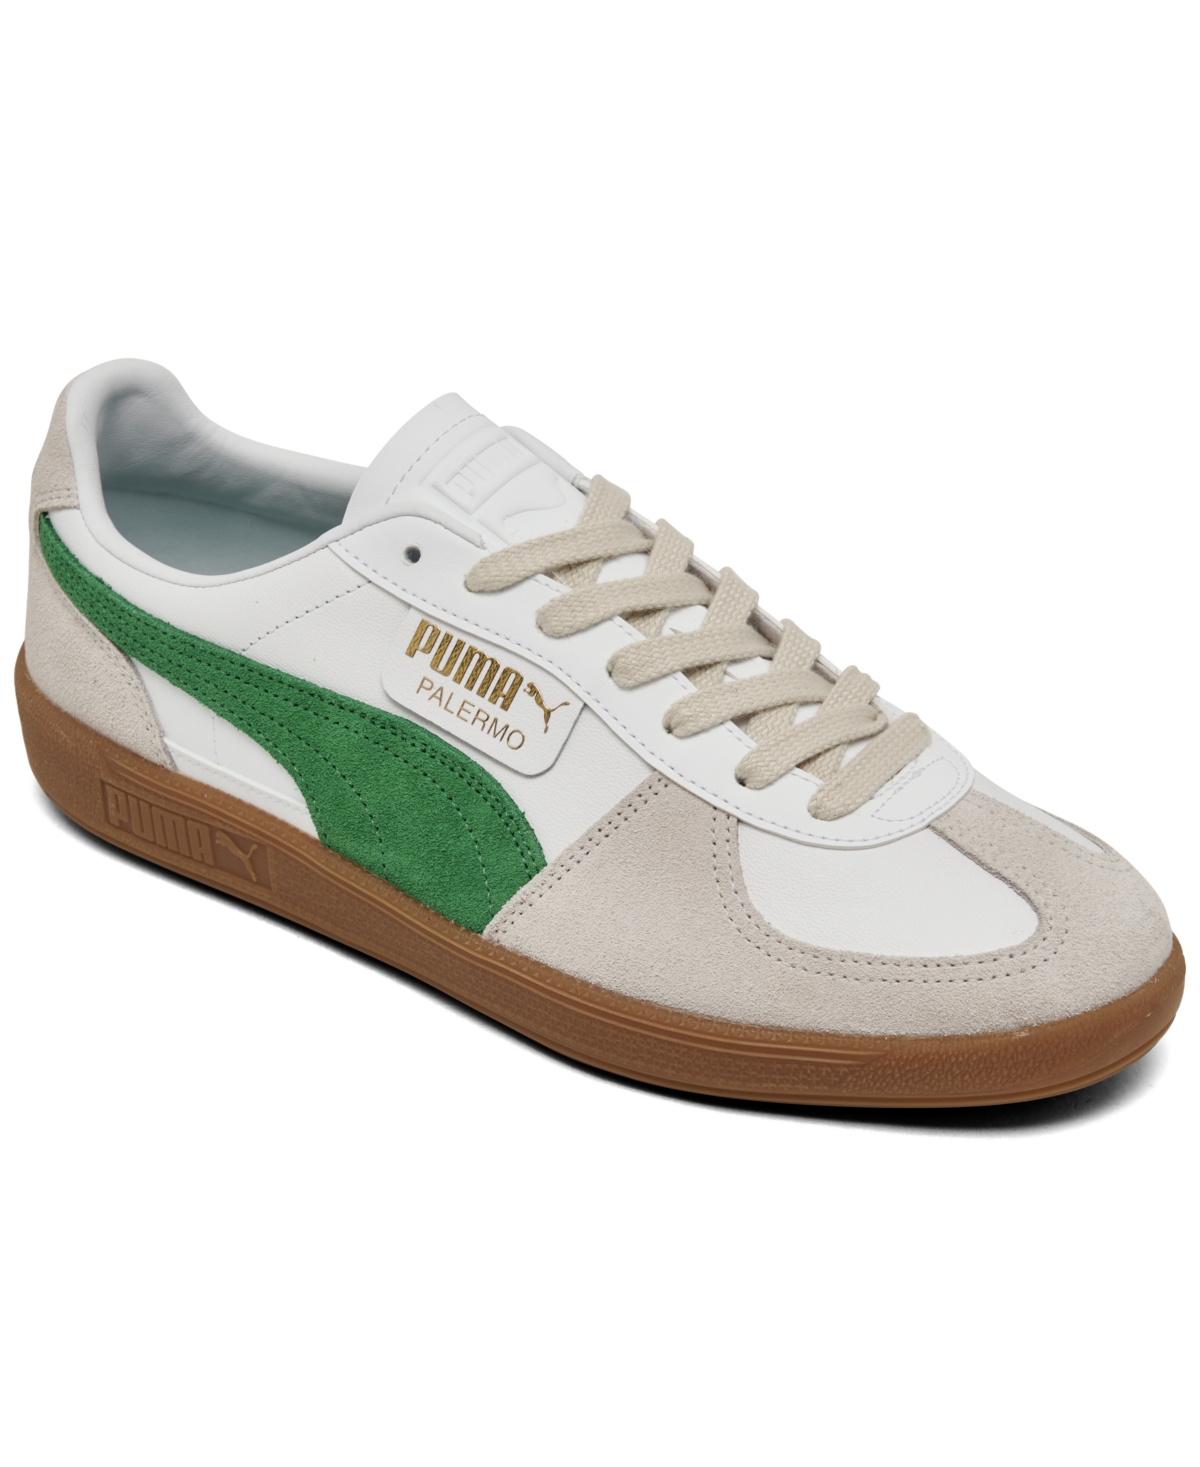 Men's Palermo Leather Casual Sneakers from Finish Line - White